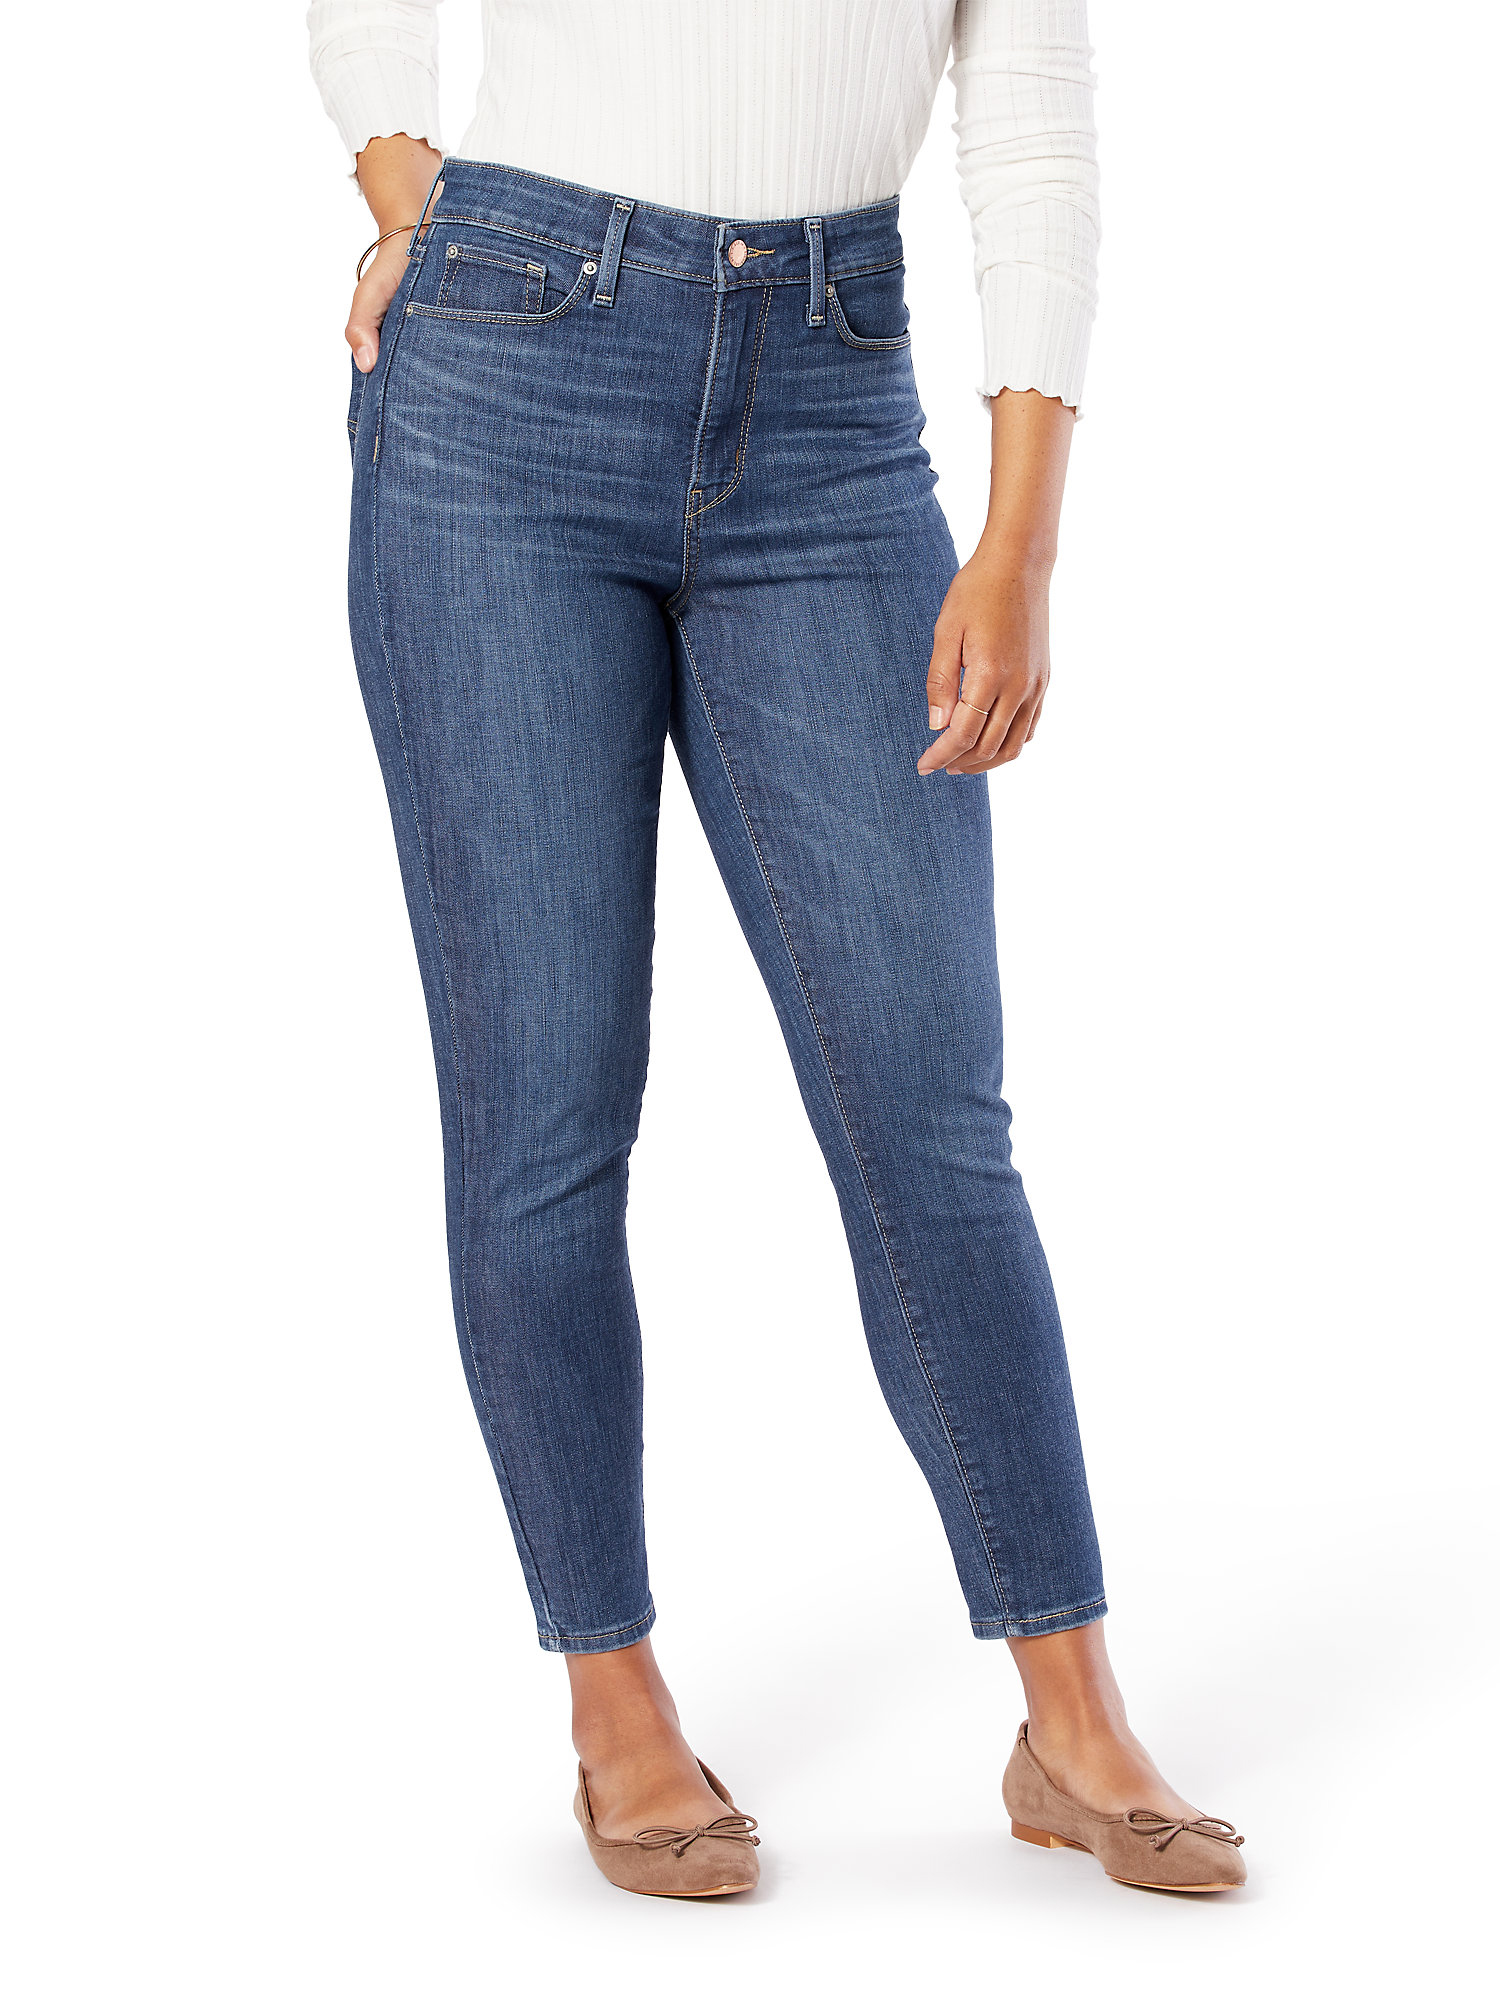 Signature by Levi Strauss & Co. Women's Simply Stretch Shaping High Rise Skinny Ankle Jeans - image 1 of 3